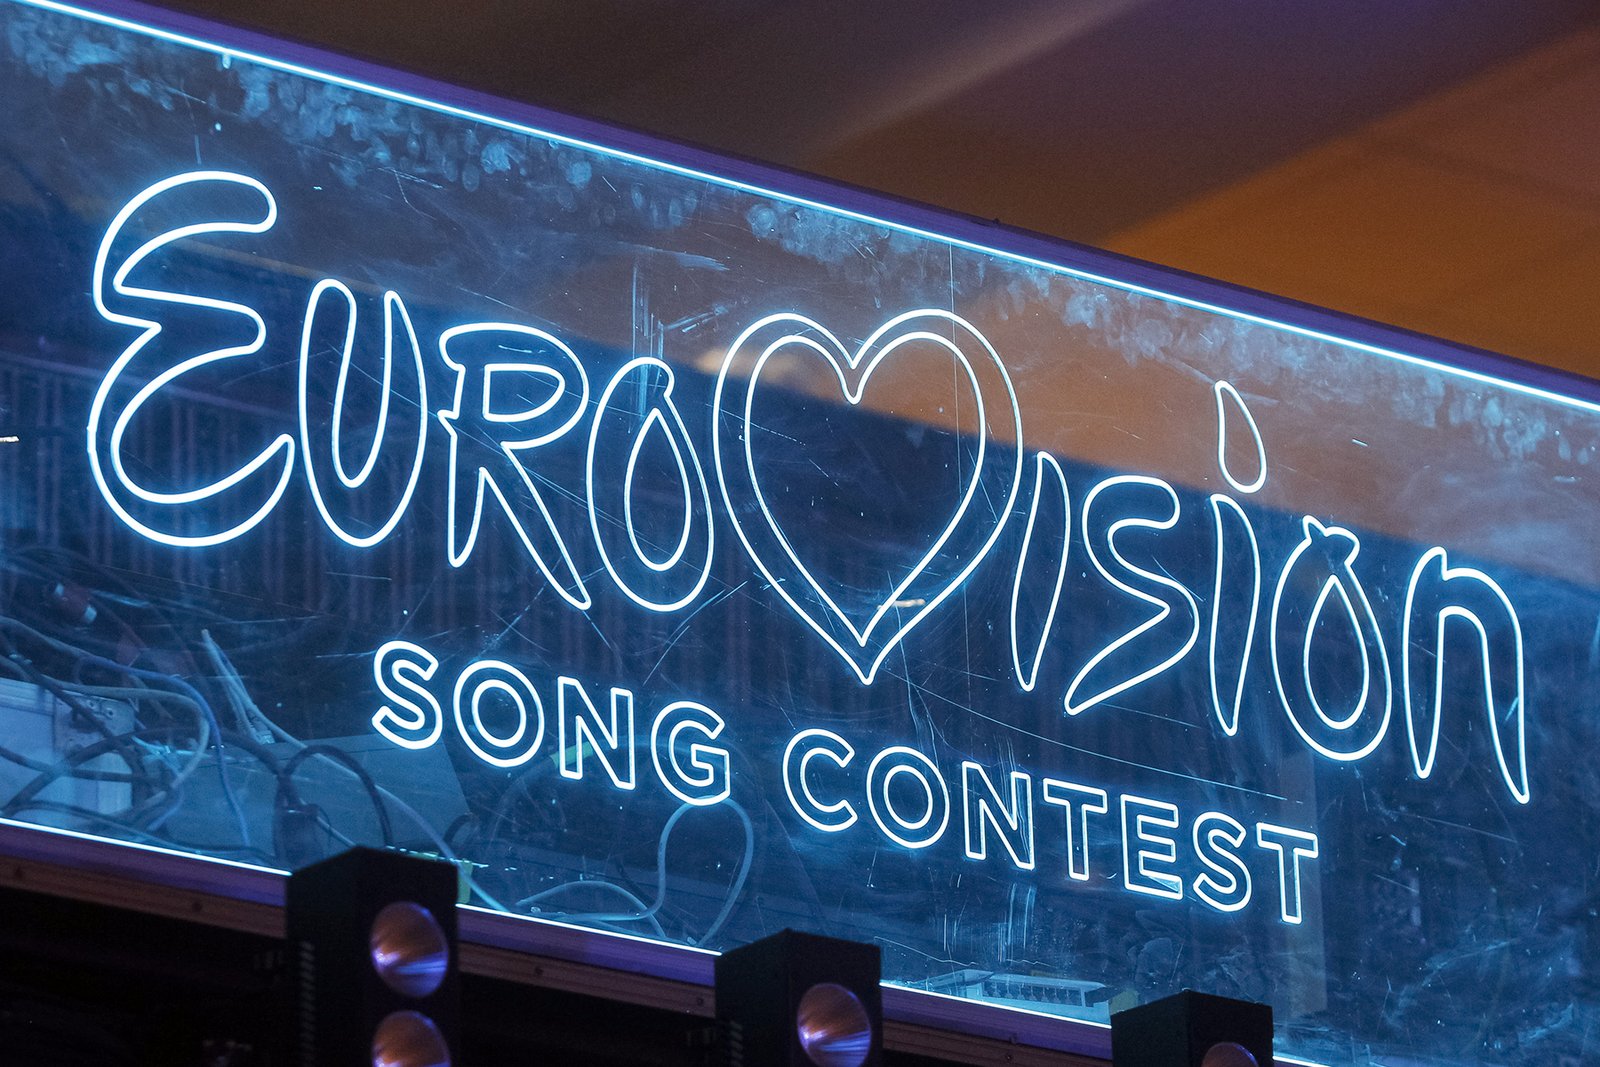 Mandatory Credit: Photo by Pavlo Gonchar/SOPA Images/Shutterstock (10564528a)
The Eurovision Song Contest logo is seen on a screen during the 2020 Eurovision Song Contest (ESC) national selection show.
Final national selection for Eurovision, Kiev, Ukraine - 22 Feb 2020
Ukrainian band Go_A with song 'Solovey' will represent Ukraine at the 2020 Eurovision Song Contest (ESC) in Netherlands. The 65th anniversary Eurovision song contest will be held in Rotterdam (Netherlands) from May 12 to May 16, 2020. Ukraine, which missed the competition last year, intends to return to participation in 2020.